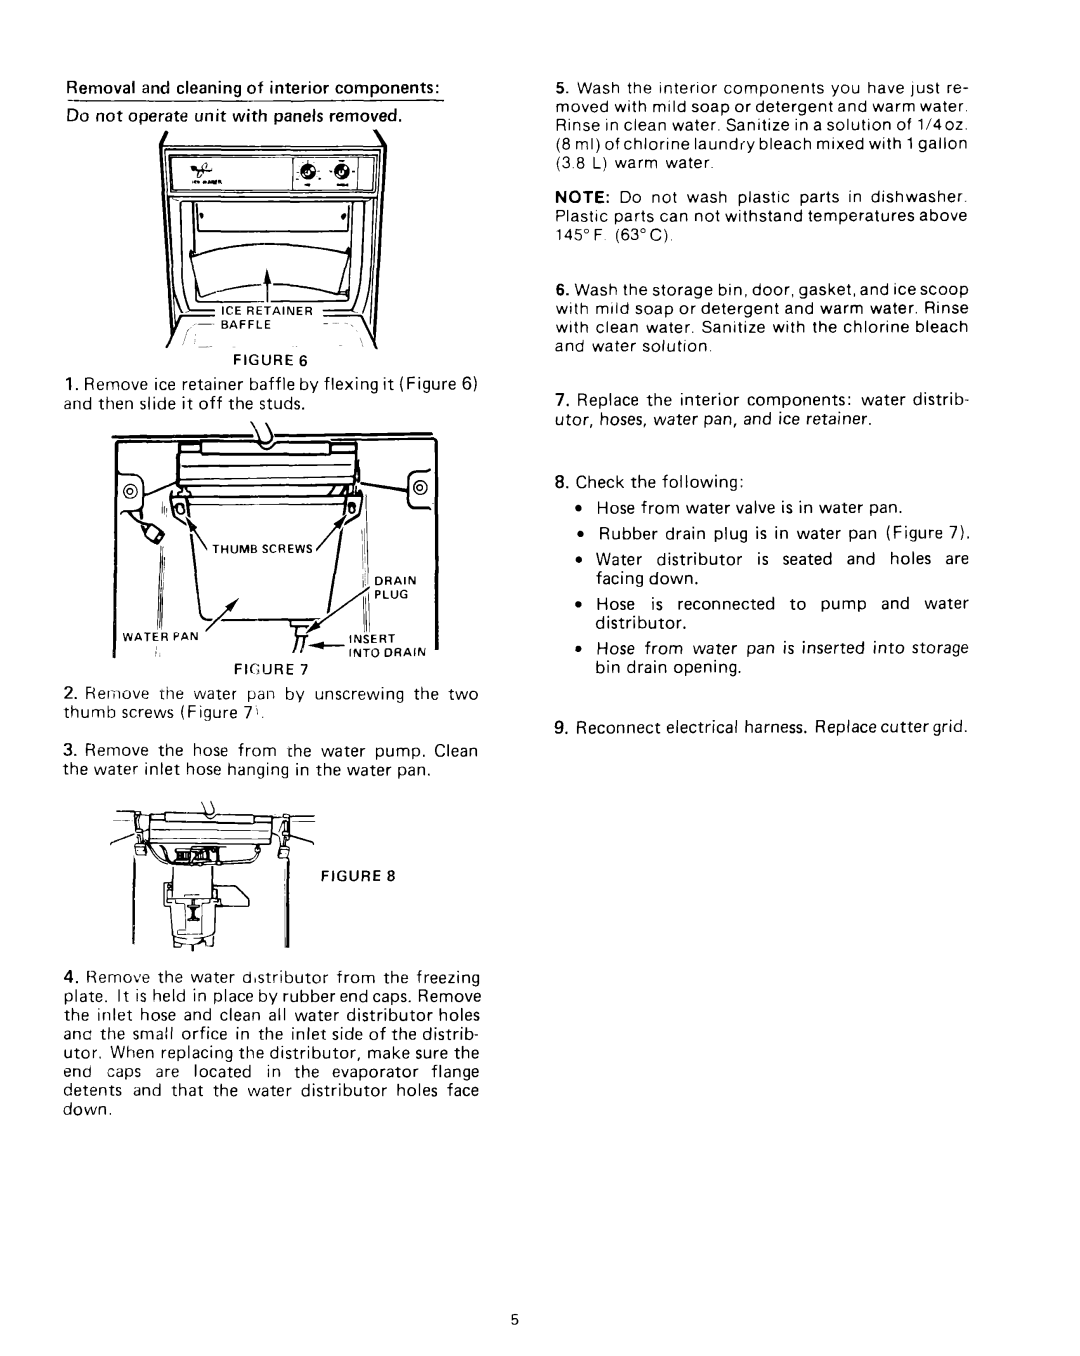 Whirlpool EHC511 manual Removal and cleaning of interior components 